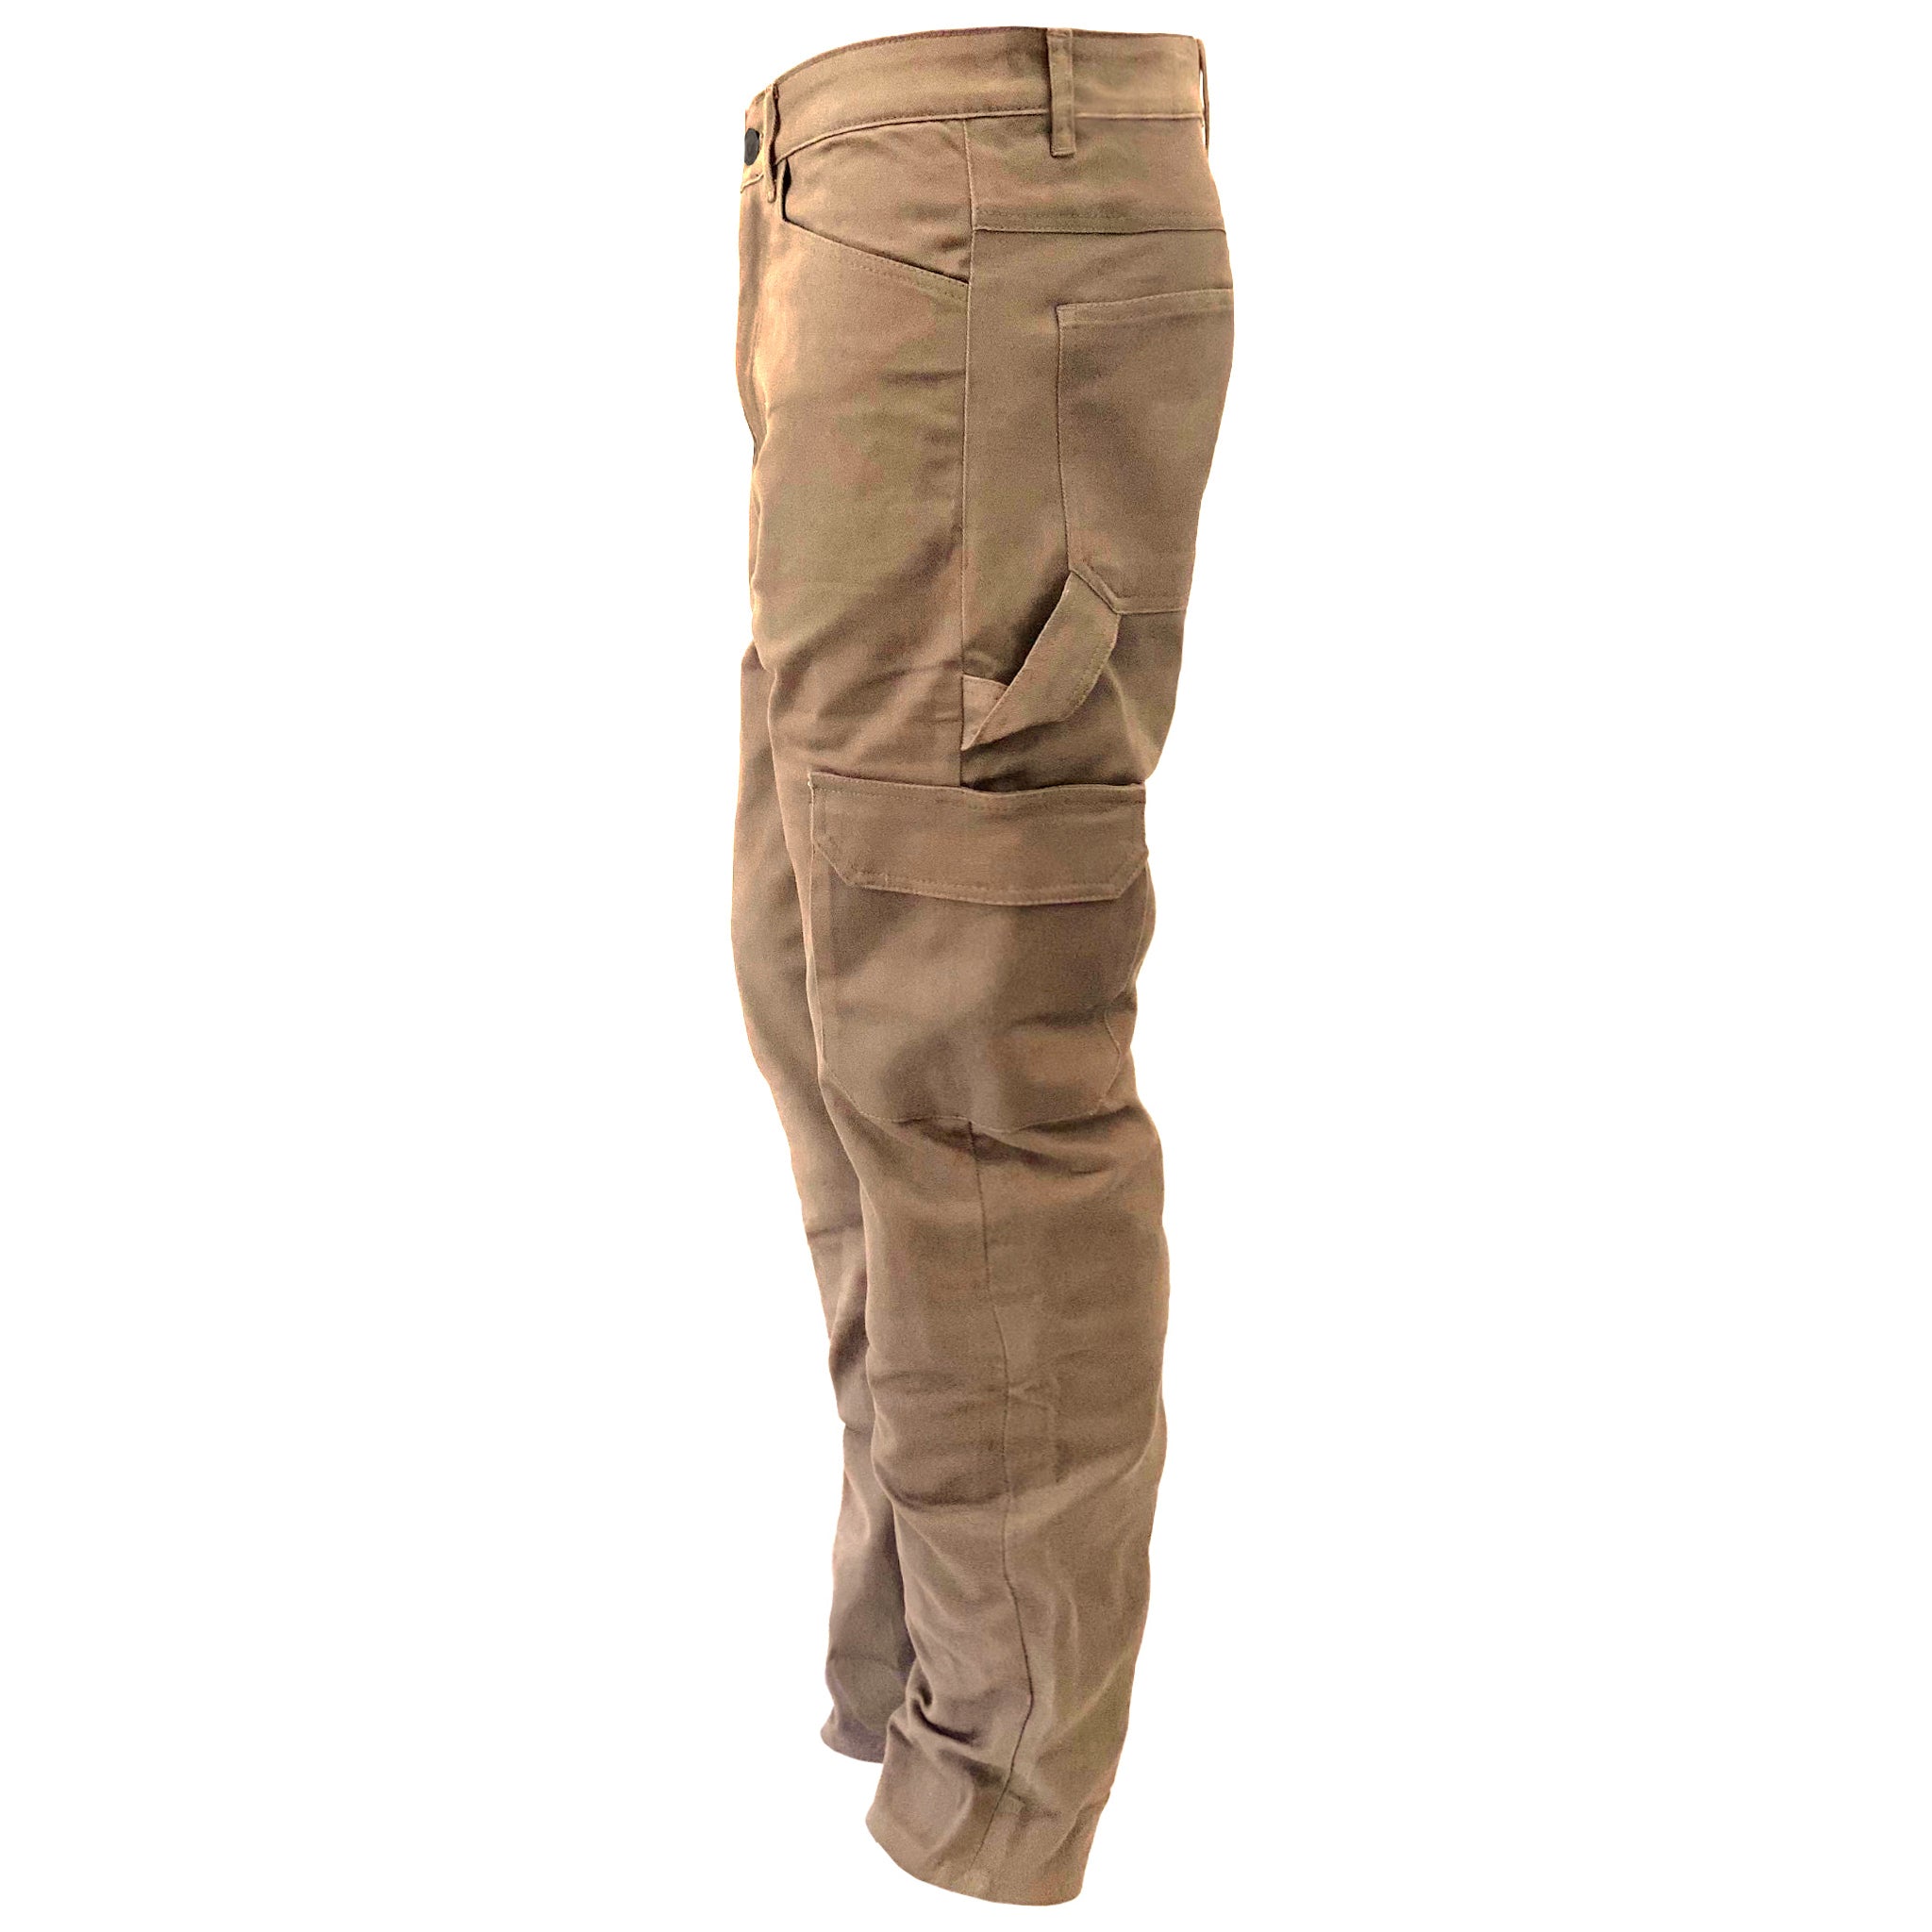 Relaxed Fit Cargo Pants -   Khaki Solid